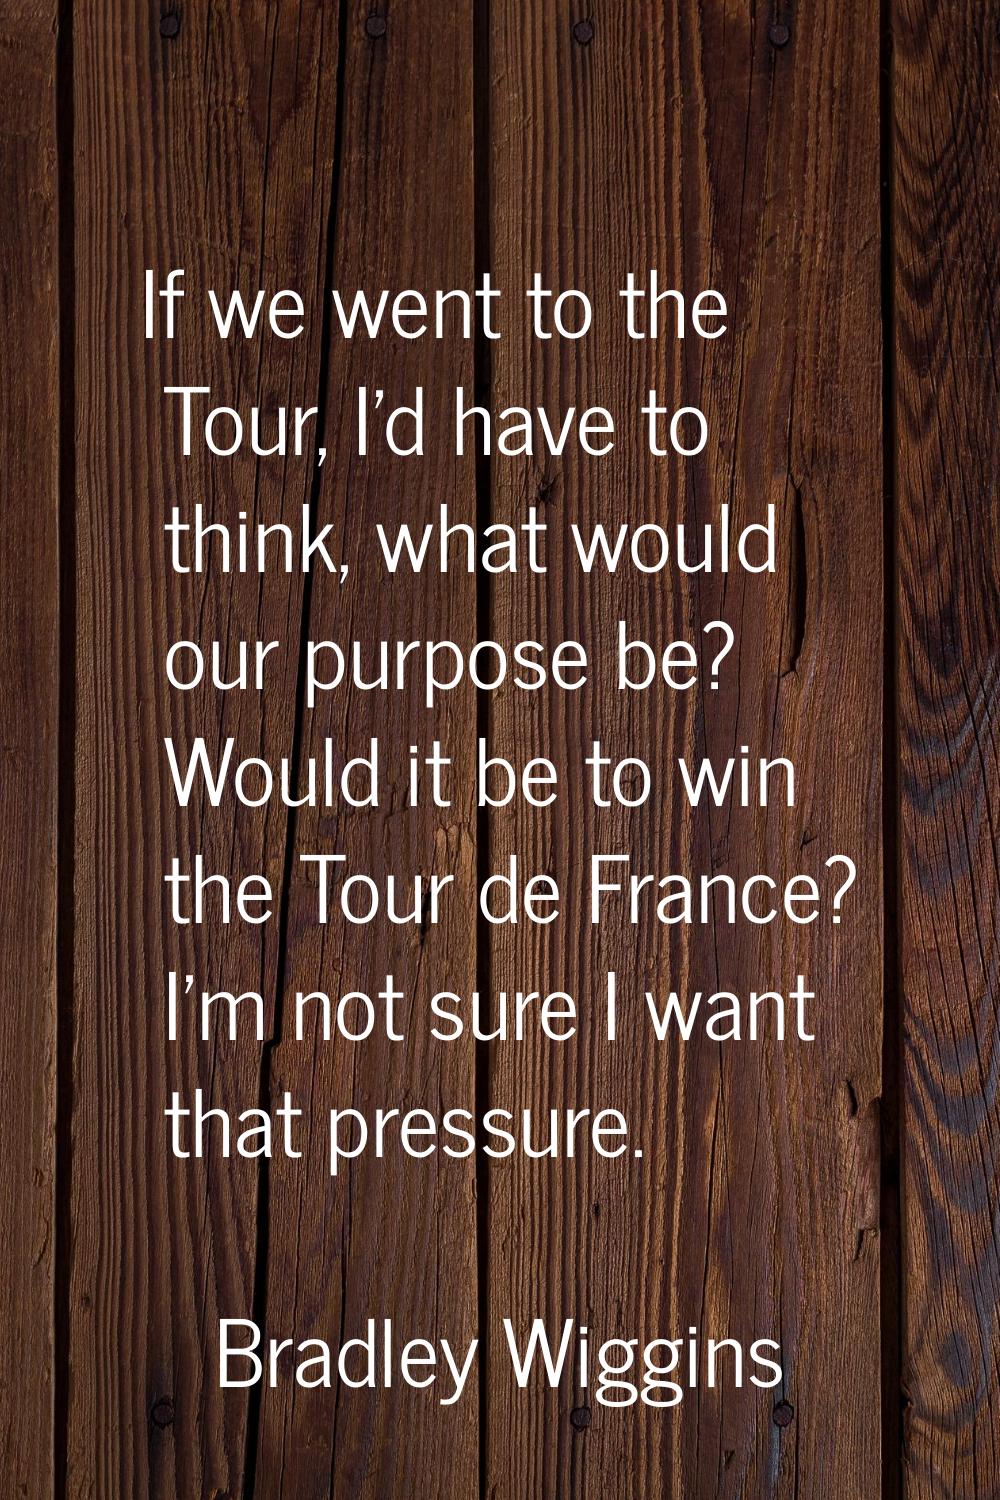 If we went to the Tour, I'd have to think, what would our purpose be? Would it be to win the Tour d